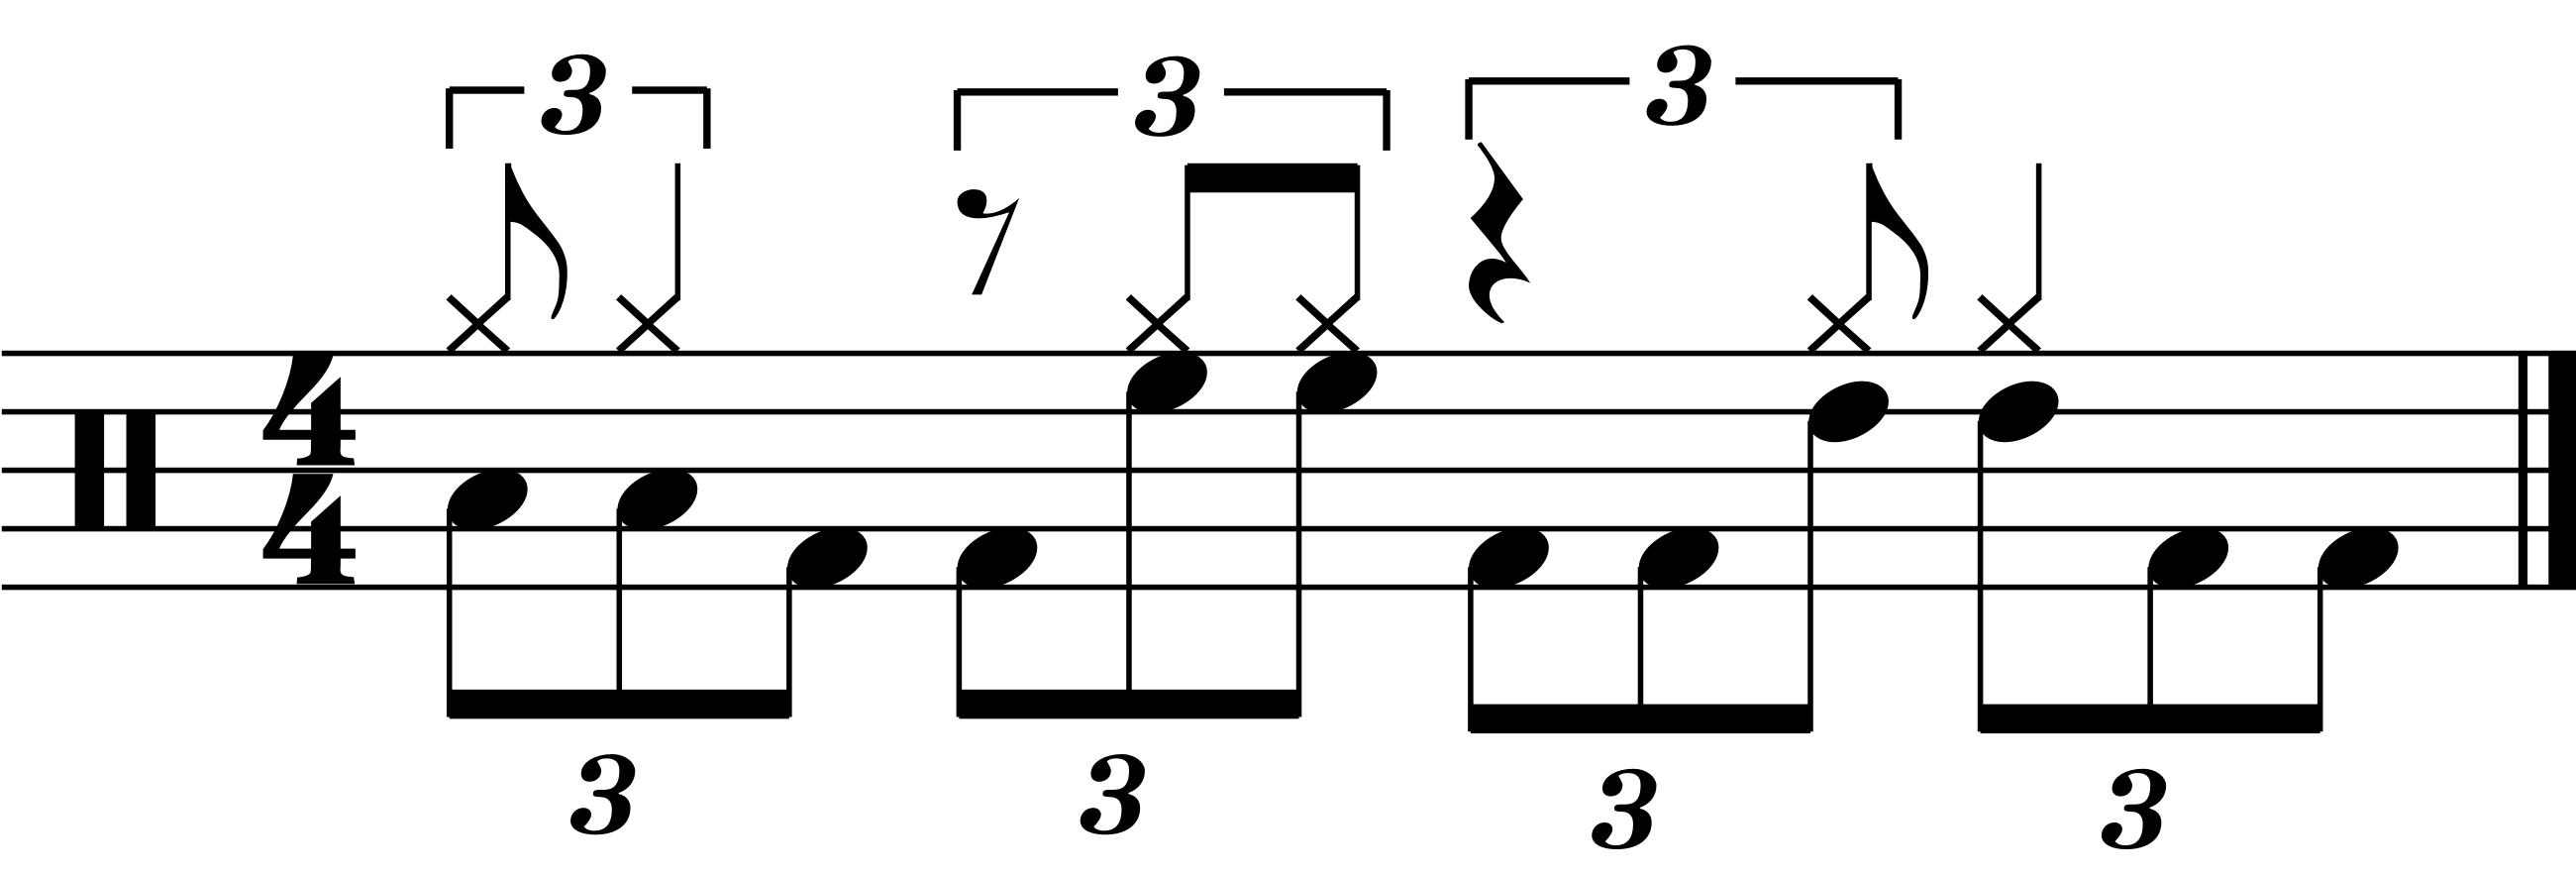 A free fill example